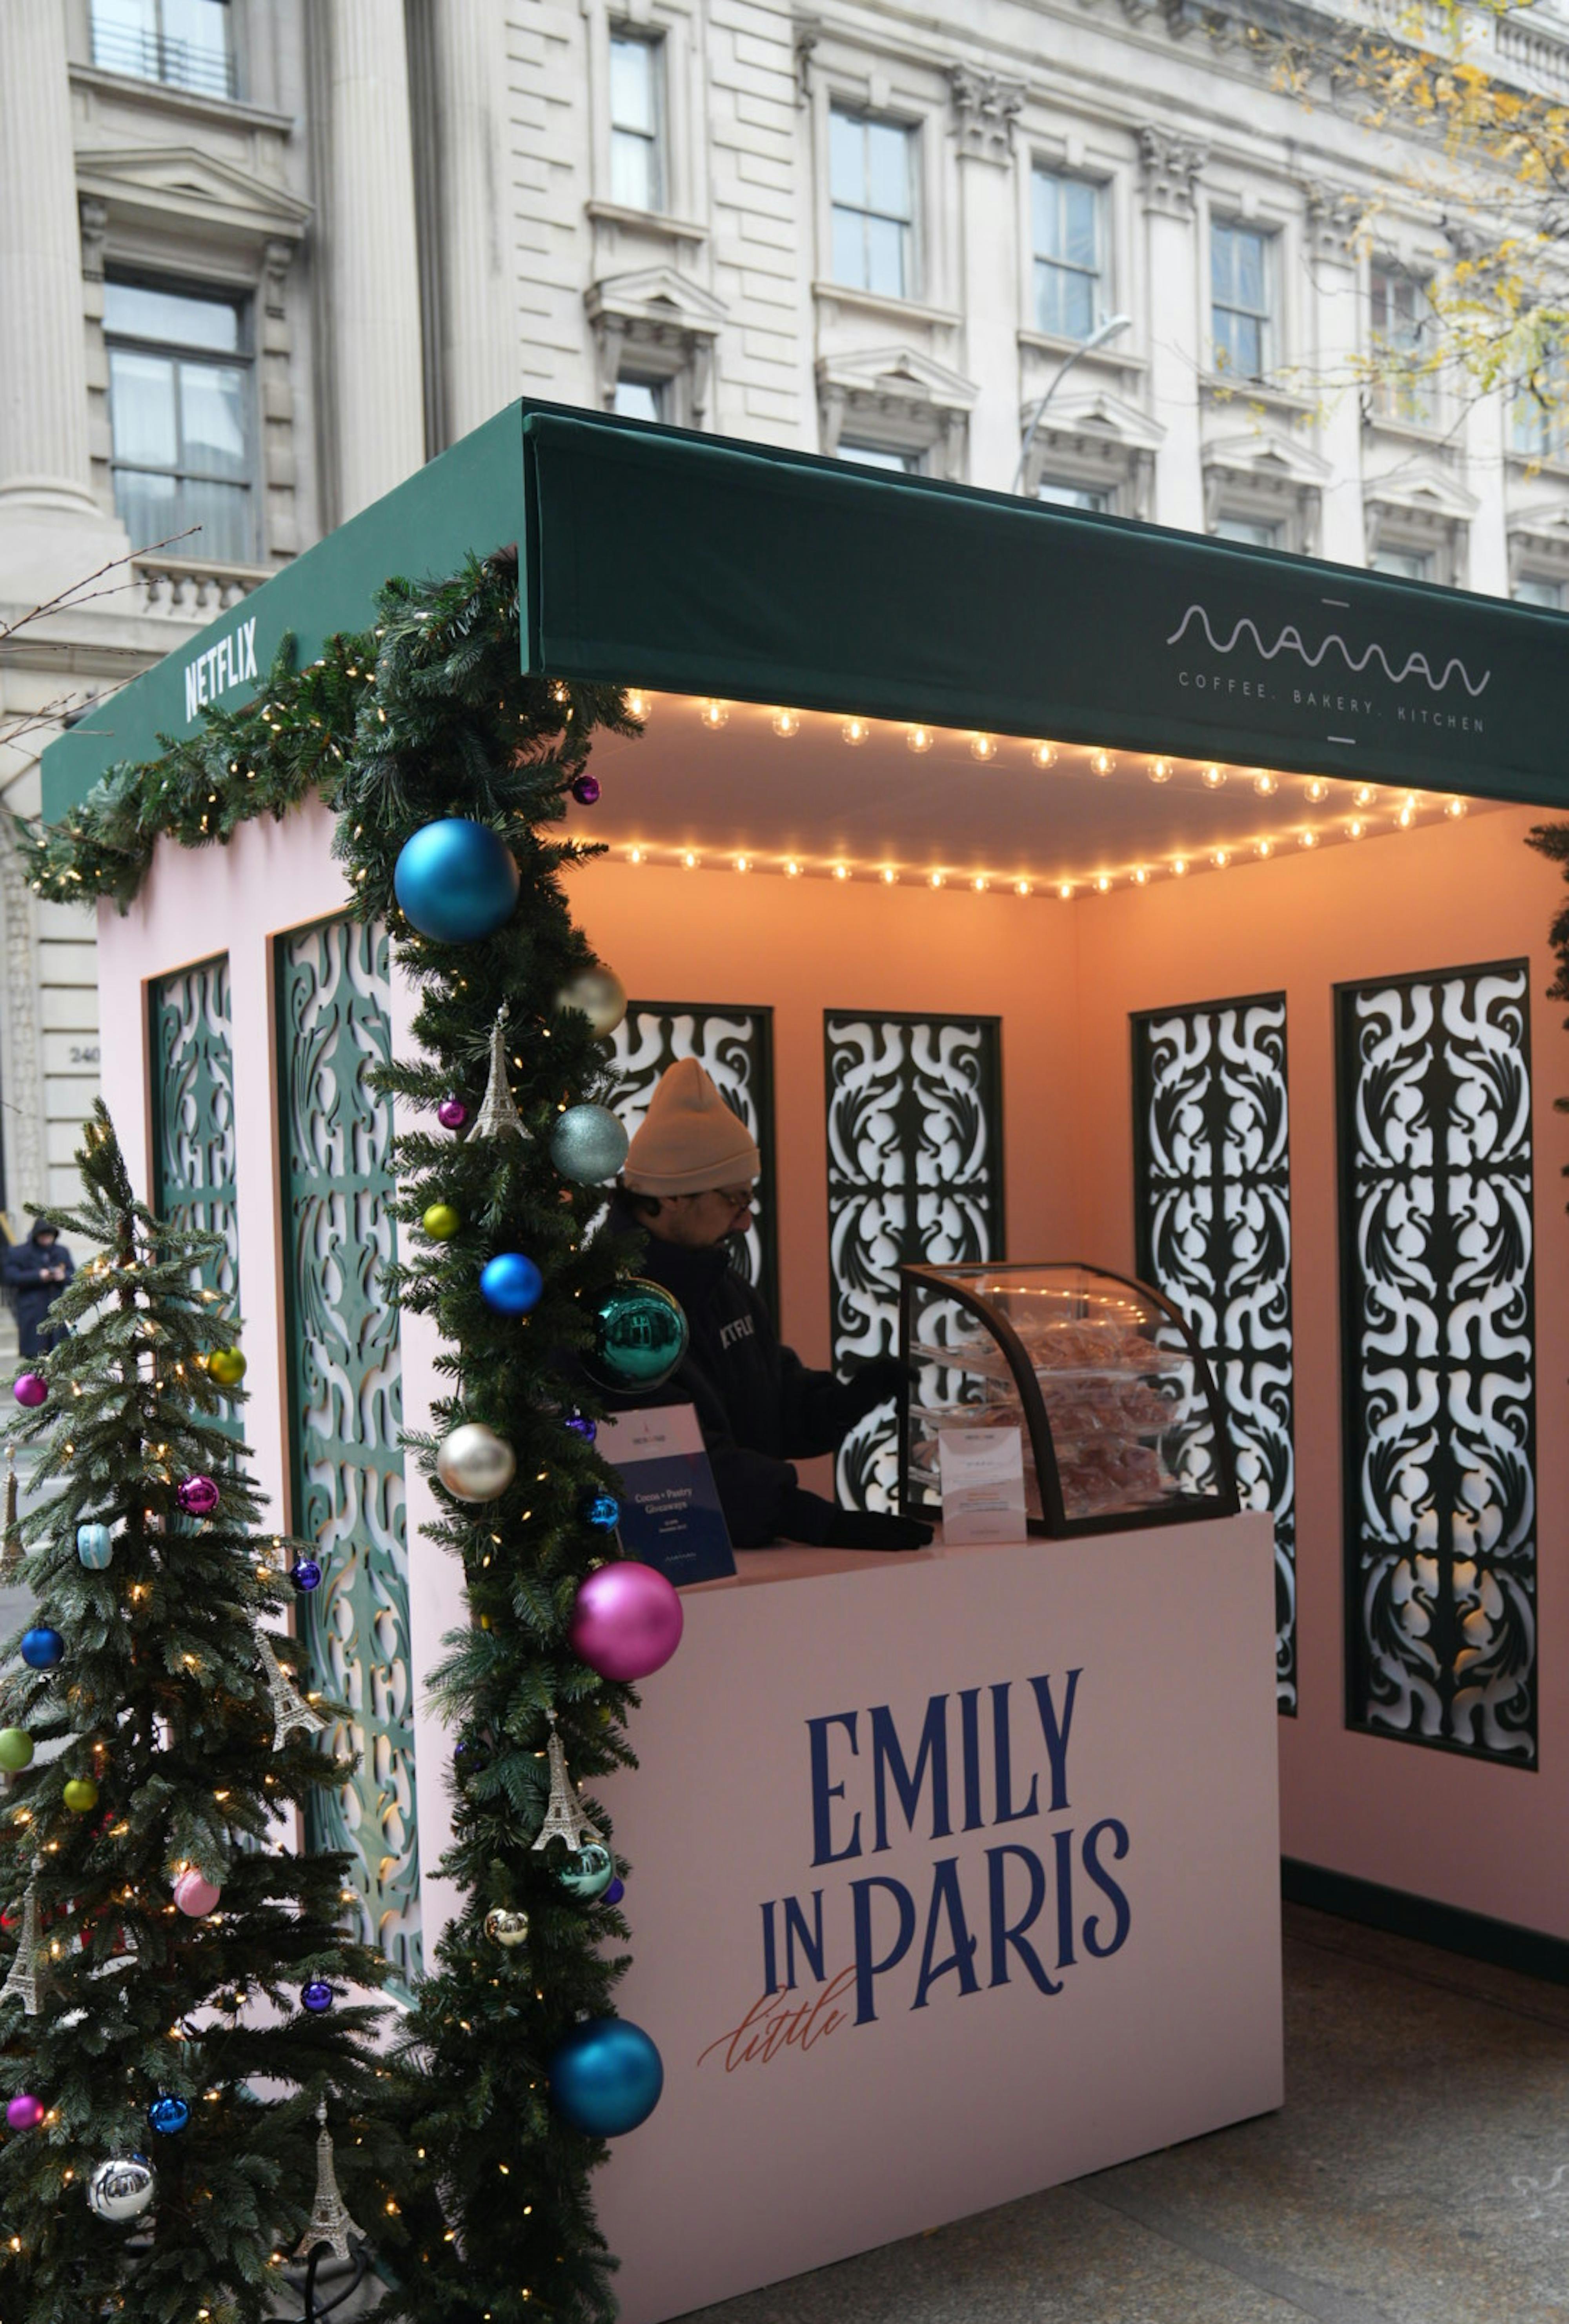 popup booth for Netflix's "emily in little paris" popup